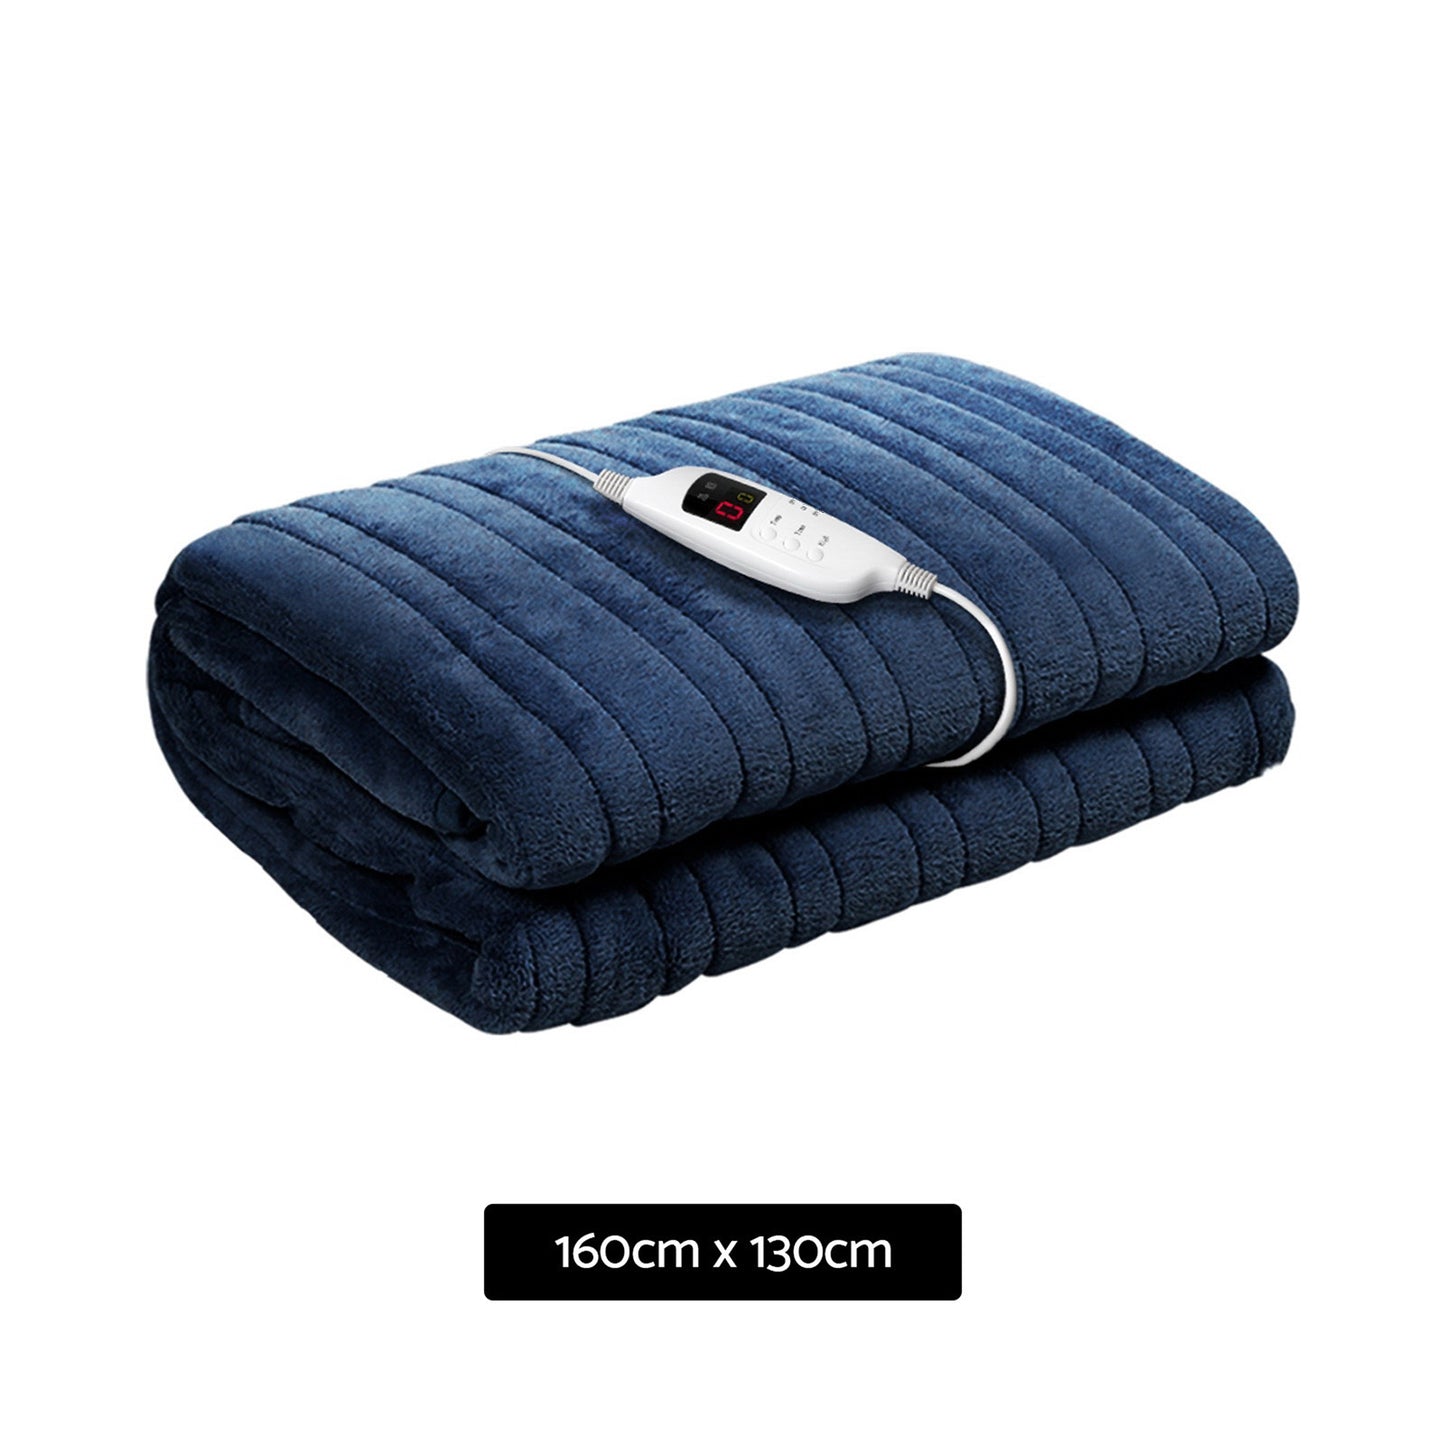 Giselle Bedding Electric Throw Blanket - Navy